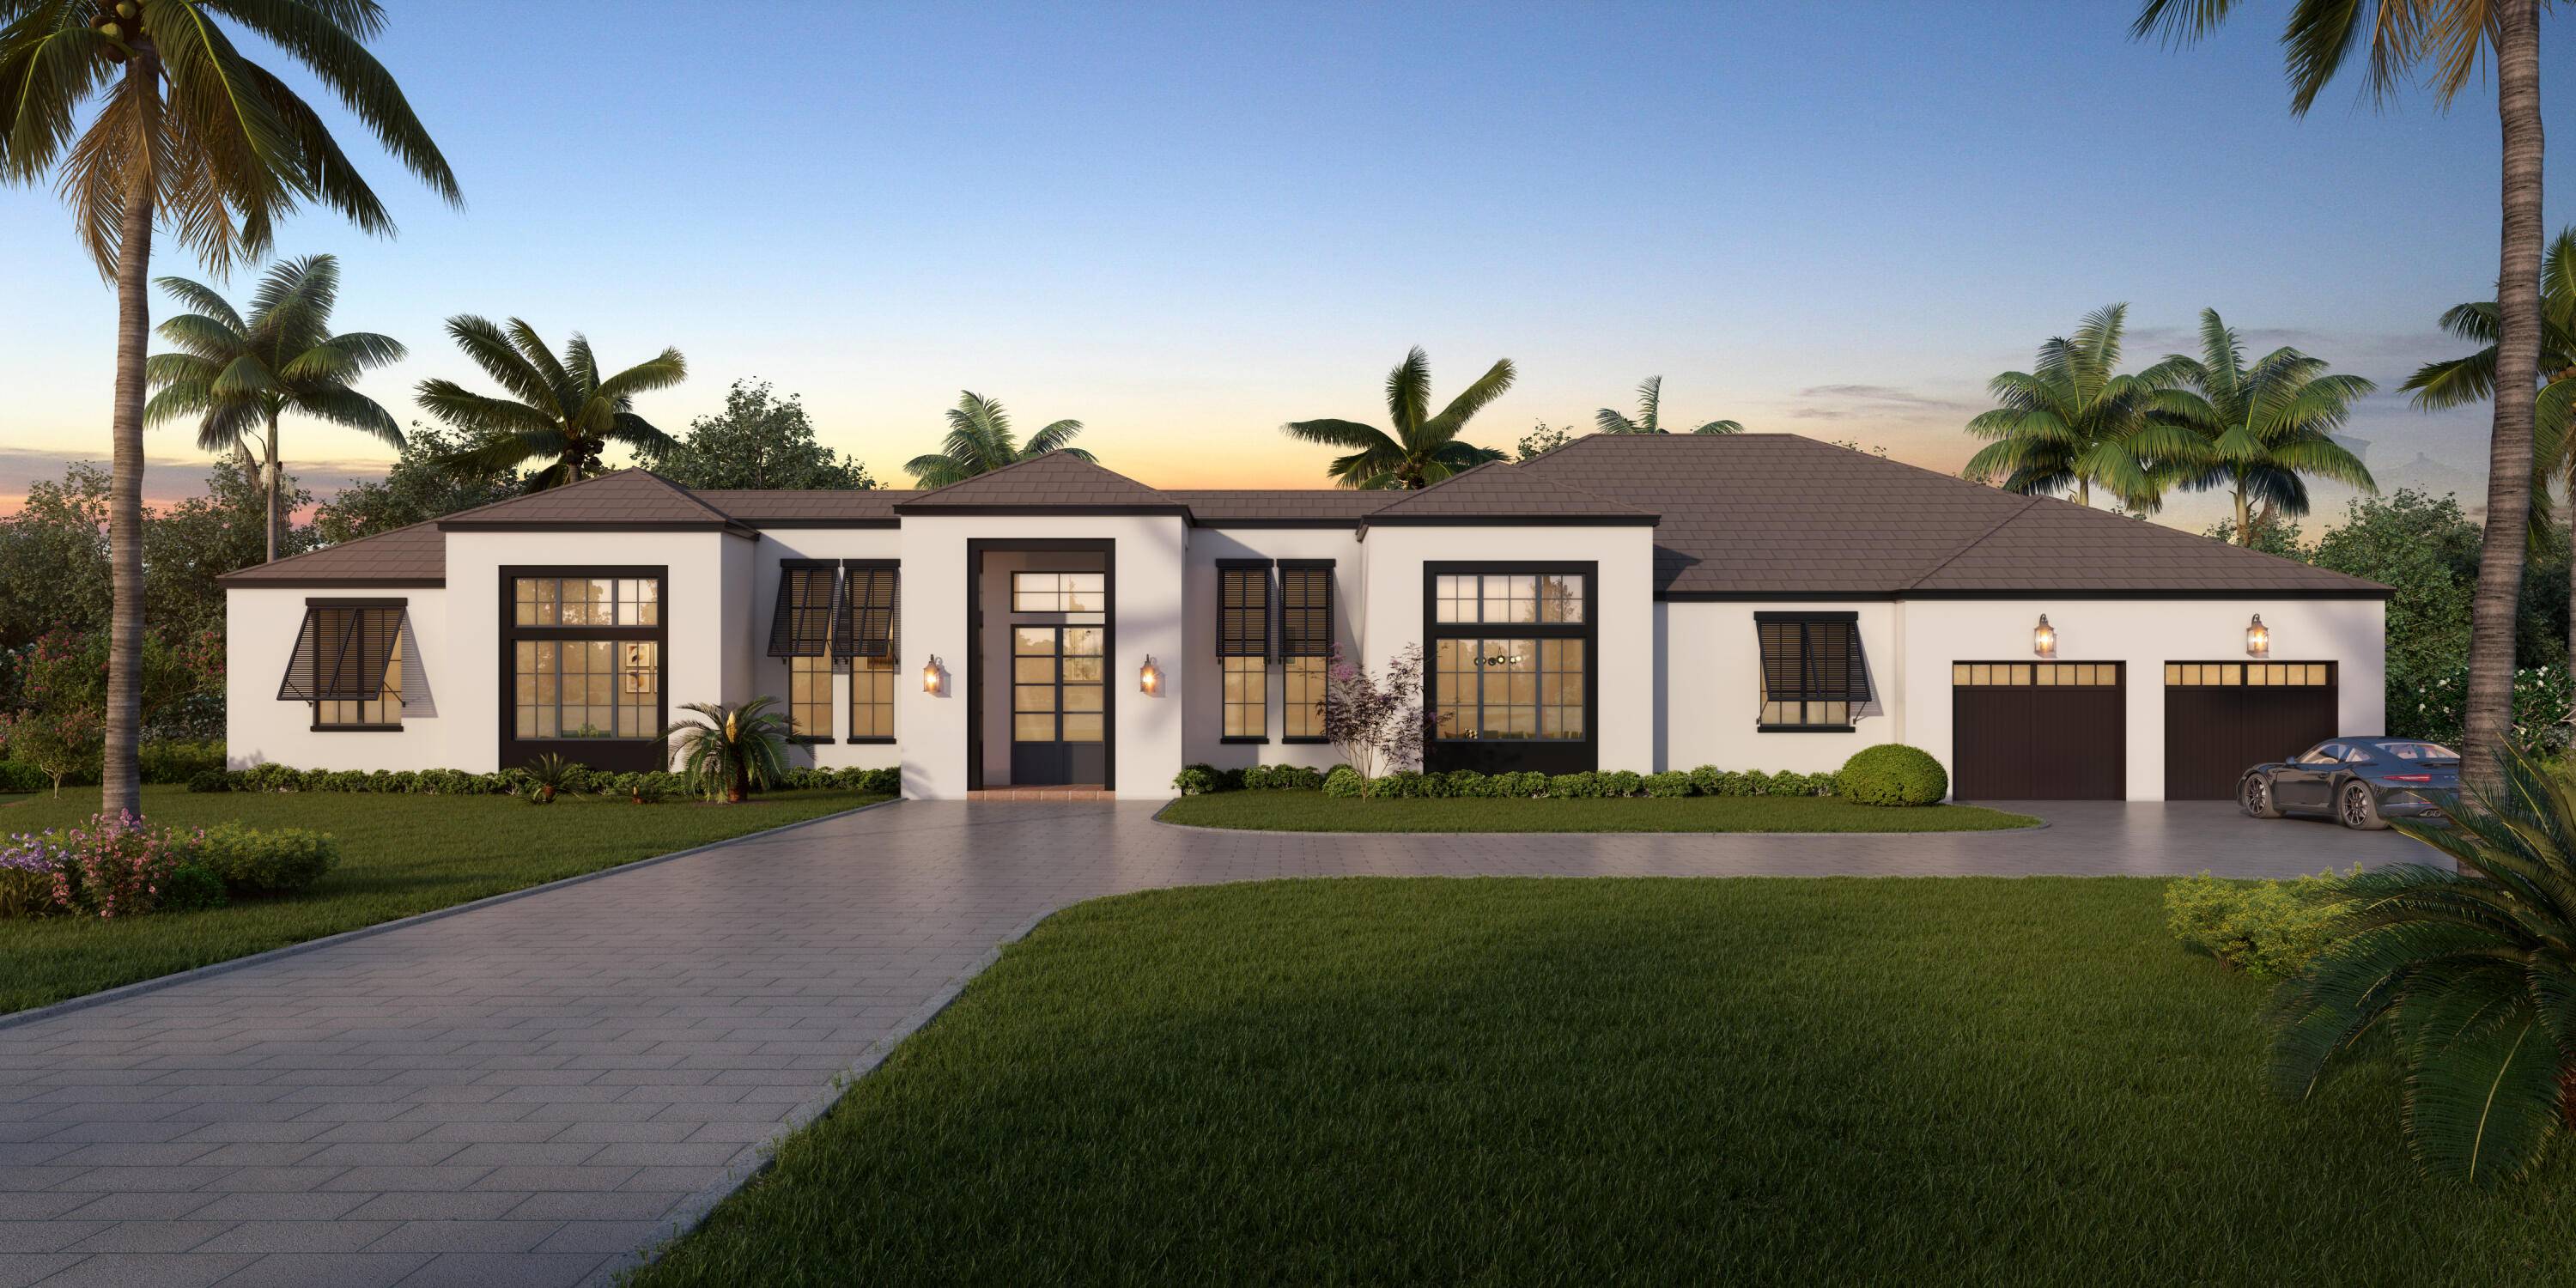 This magnificent new construction estate is situated on a double lot in the new highly coveted neighborhood of Blue Cypress within the Palm Beach Polo Club.